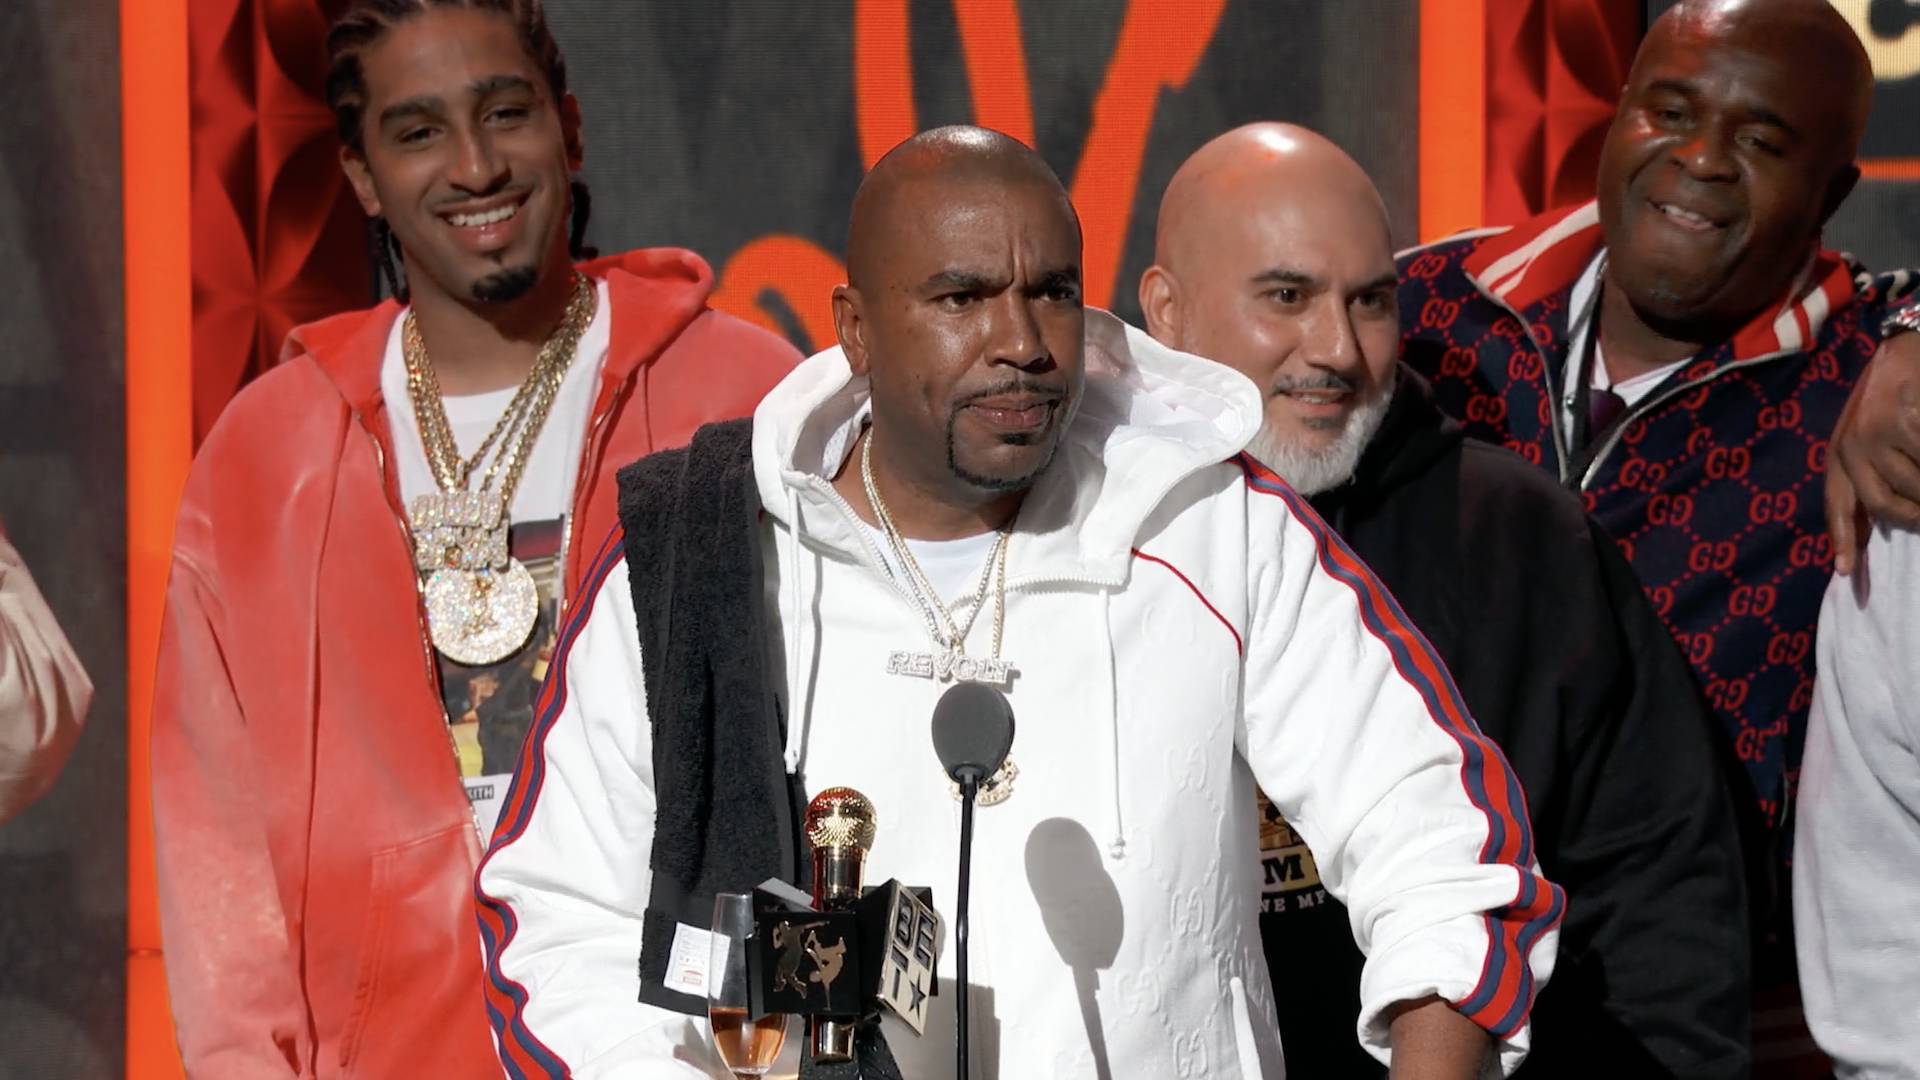 Rapper N.O.R.E. accepting an award in a white hoodie, on stage at the BET Hip Hop Awards 2022.